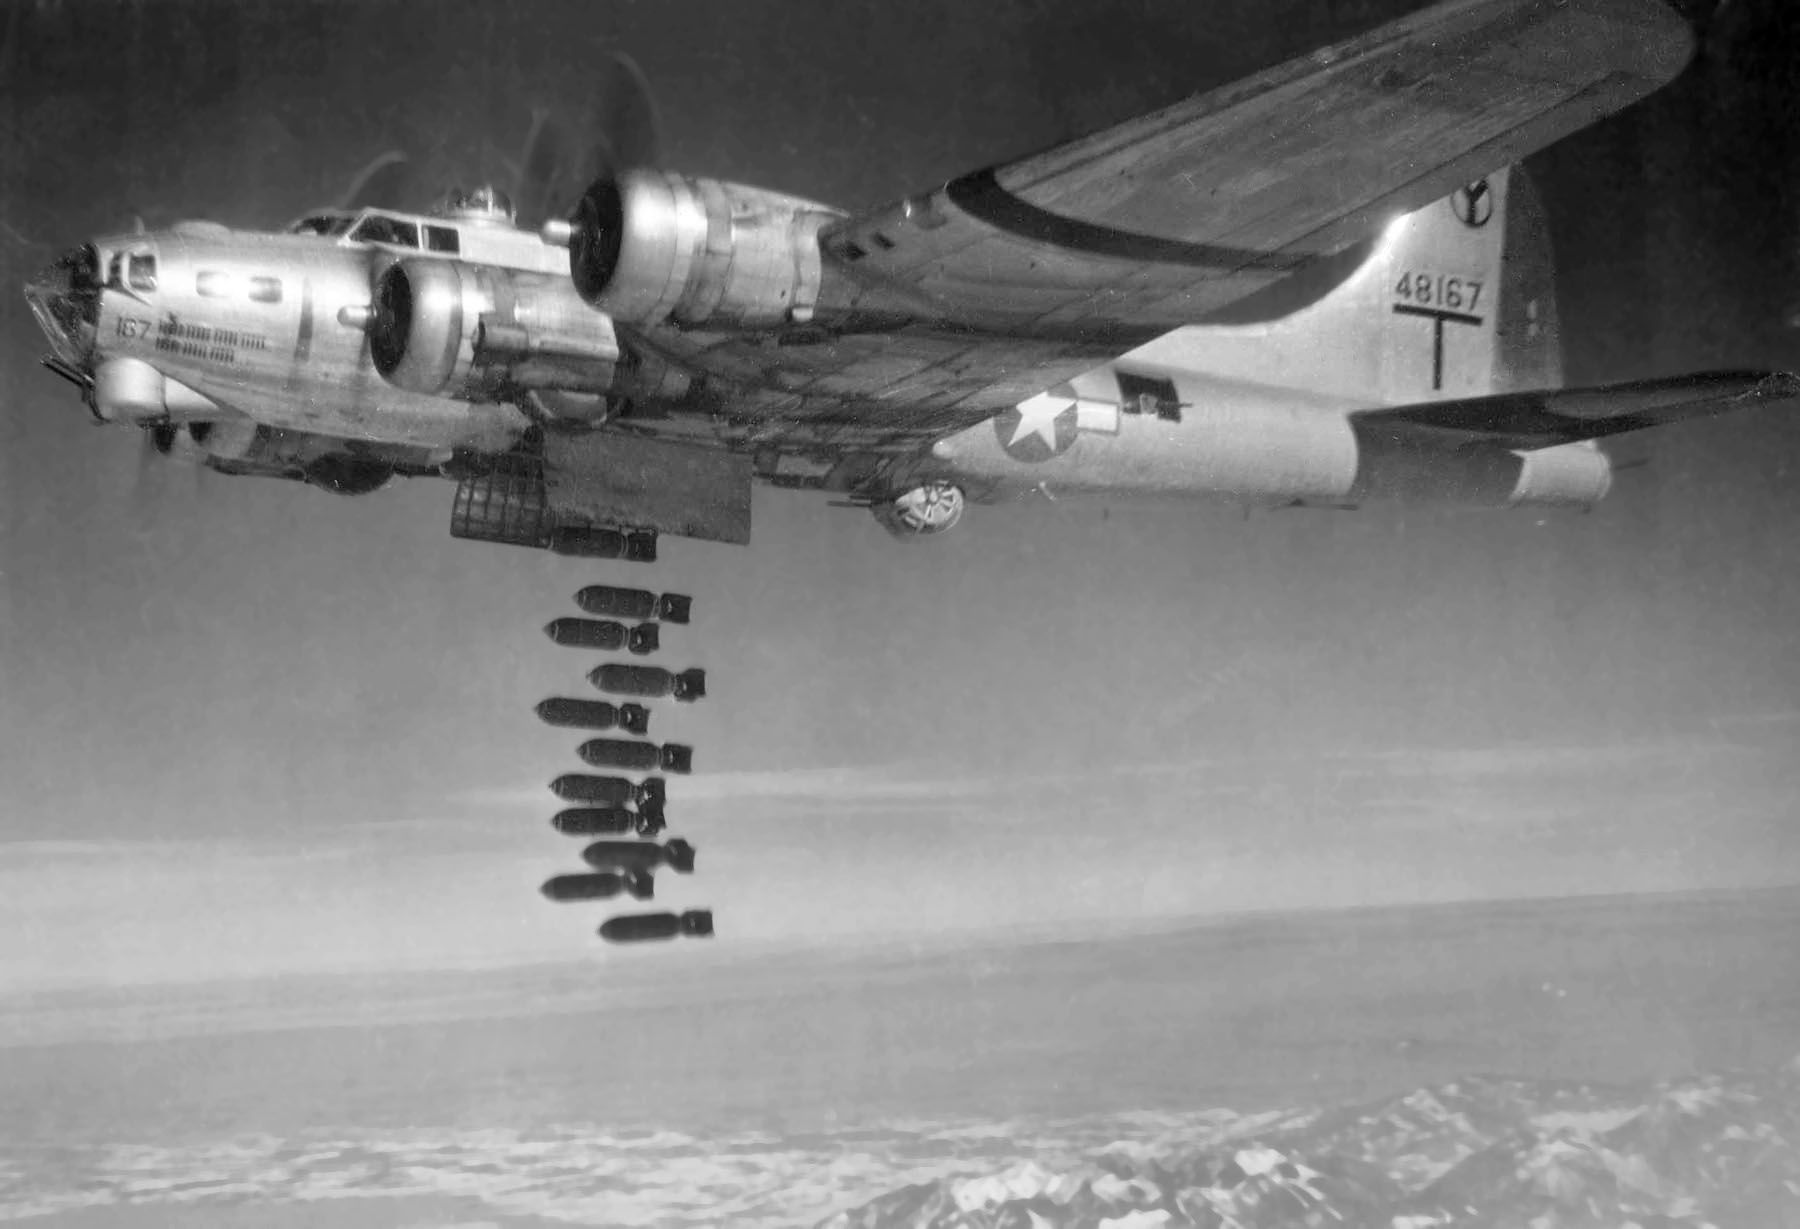 Boeing B 17G 2 BG Dropping Bombs:Boeing B 17 Flying Fortress. Vintage Aircraft, Aircraft, Us Bombers